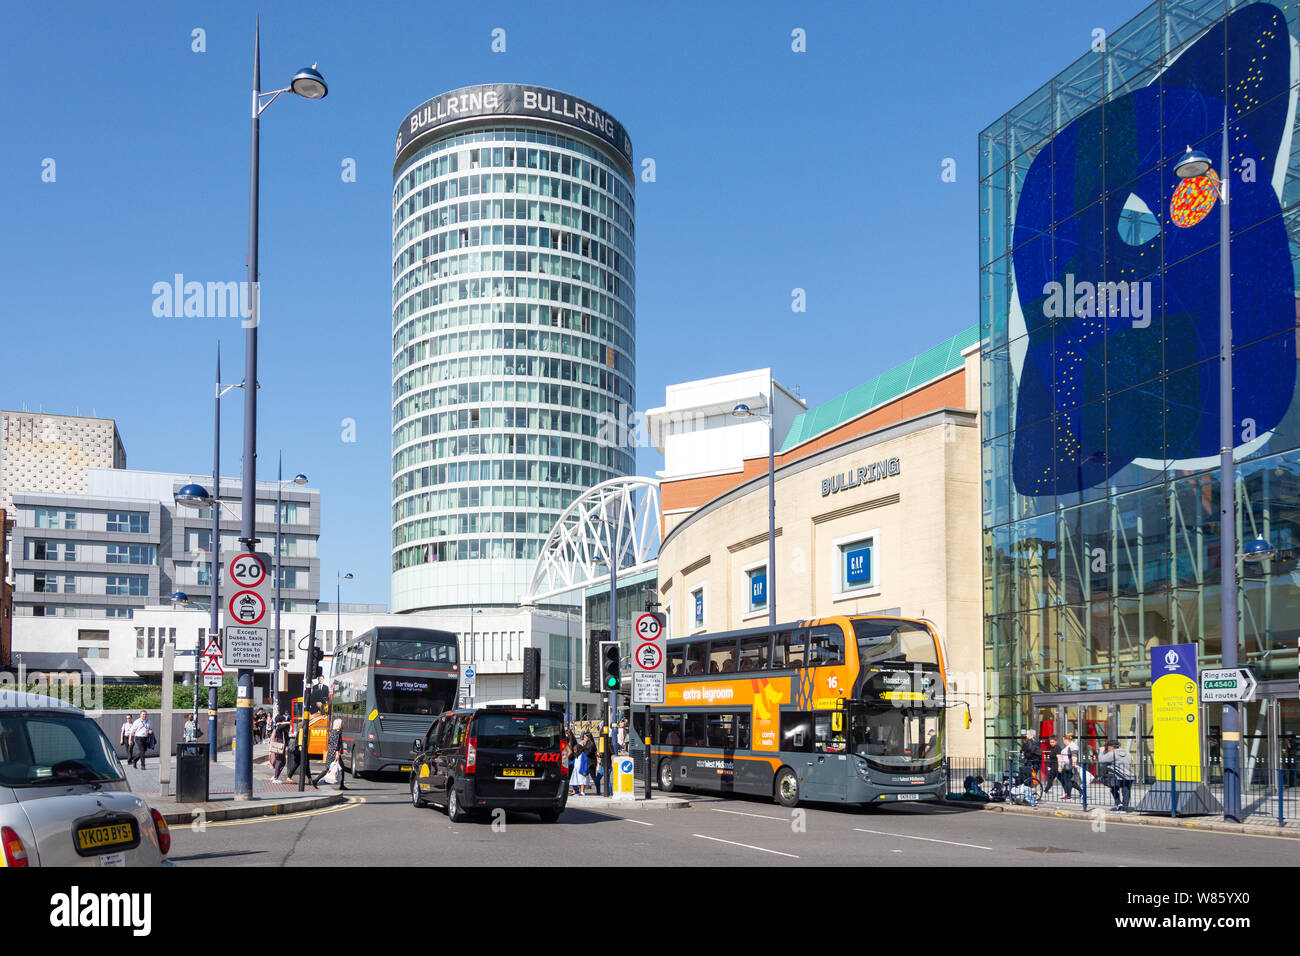 Buses and taxis on St Martins Circus Queensway, Birmingham, West Midlands, England, United Kingdom Stock Photo